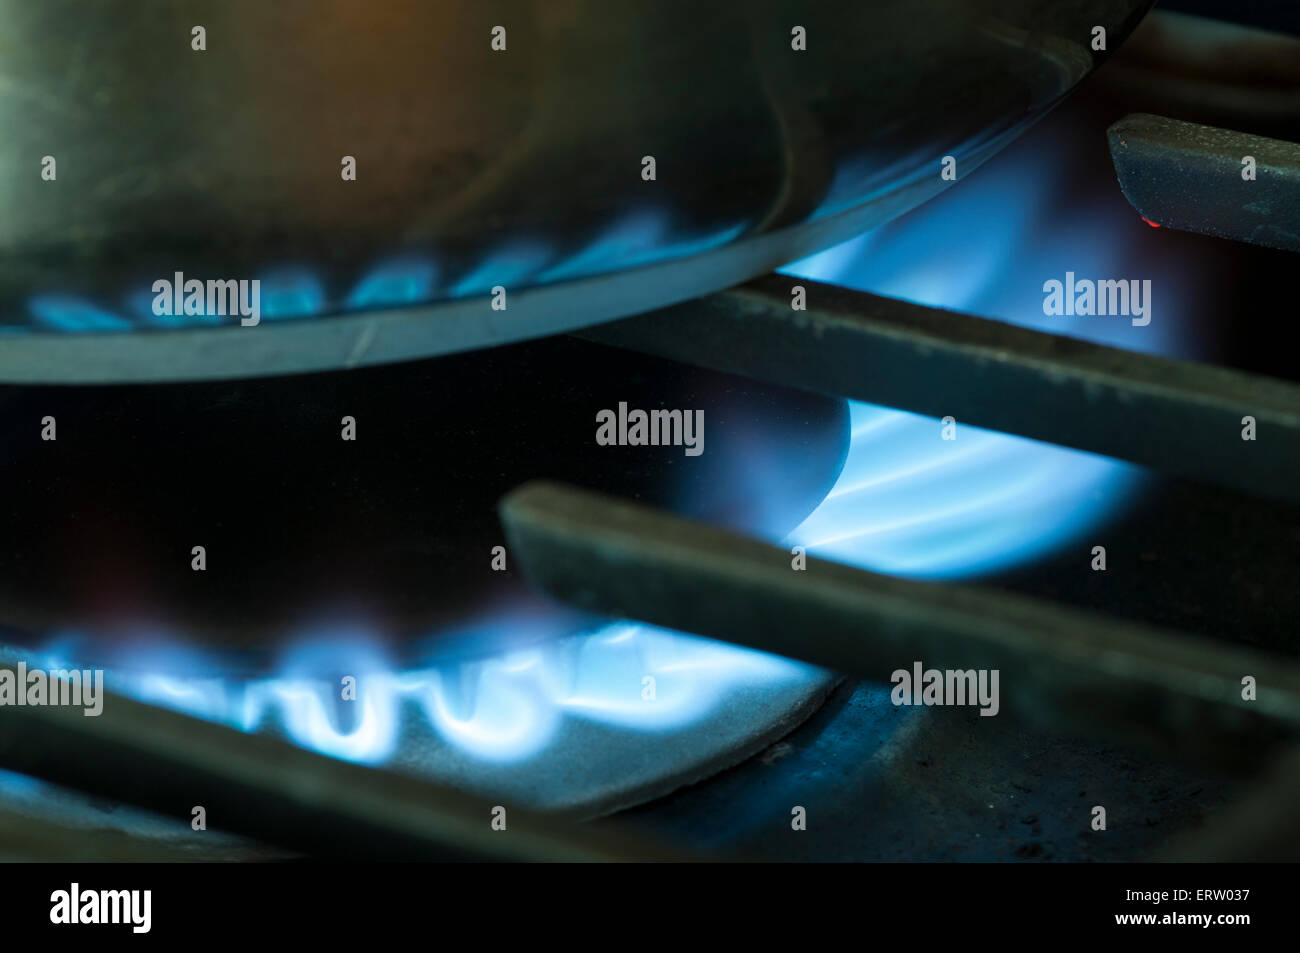 Natural gas  for heating and cooking; image is a close  up of a bright blue flame of gas used to heat or cook on a range top in a residential kitchen Stock Photo